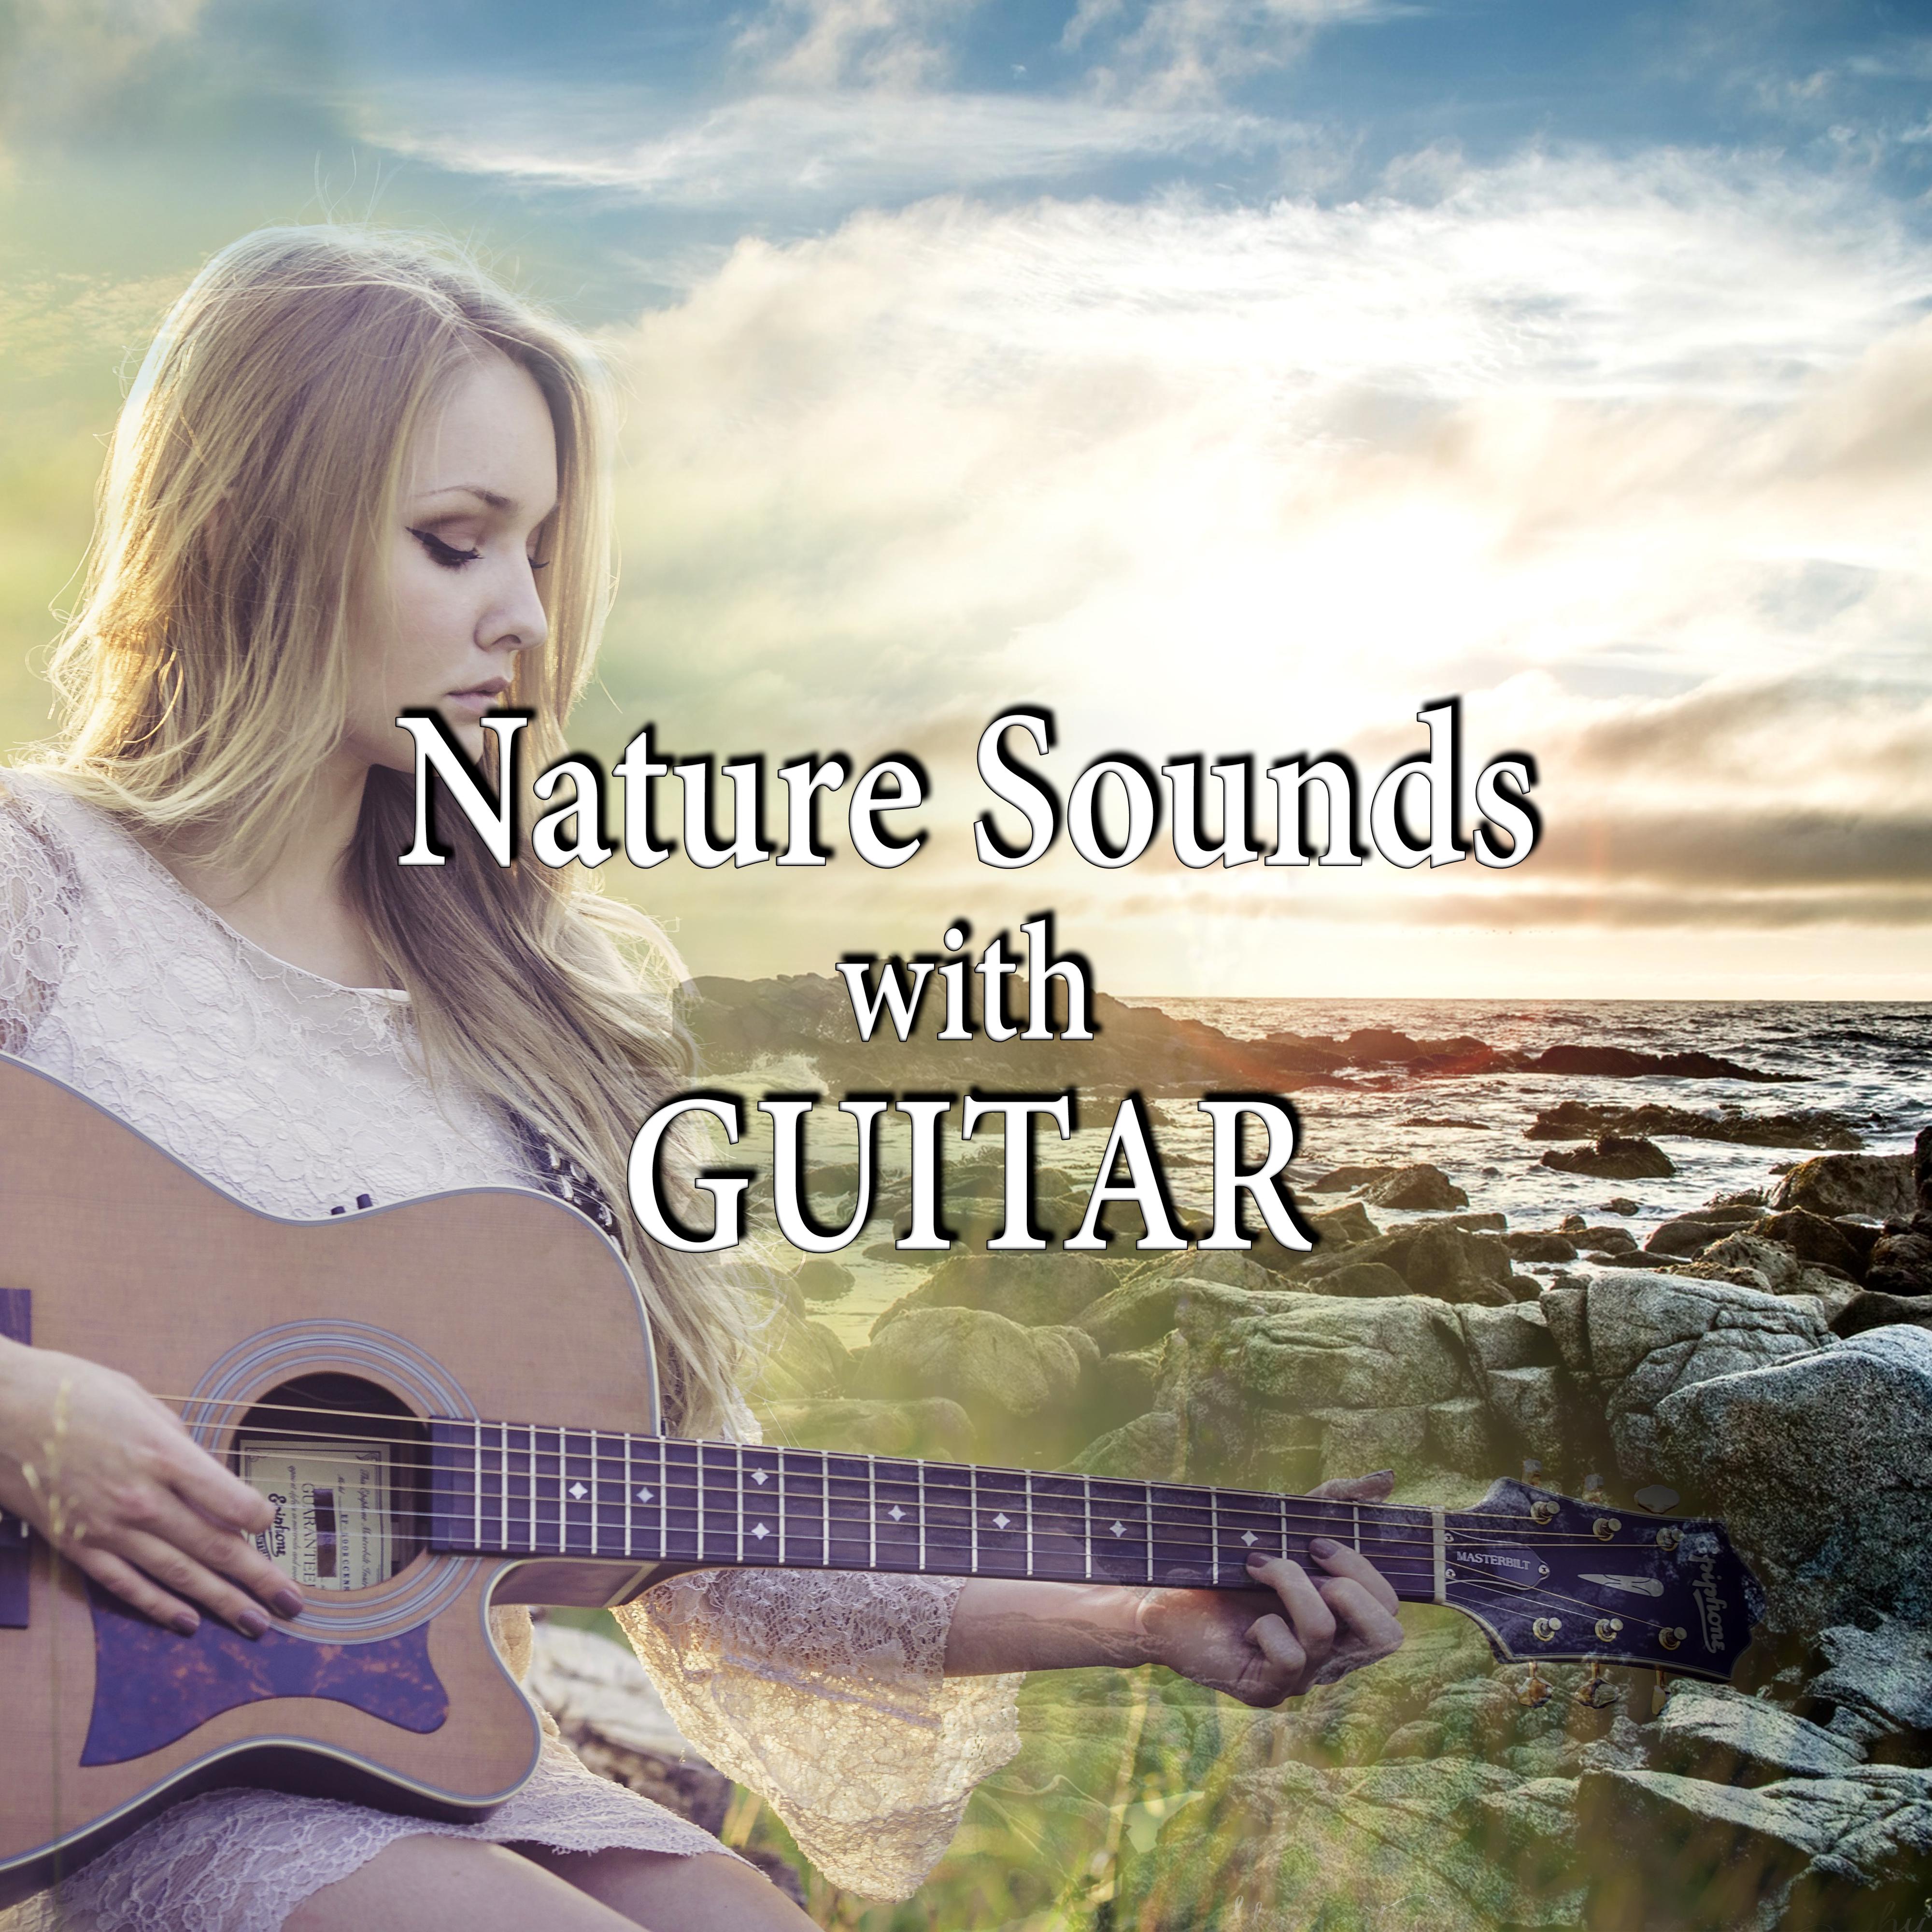 Nature Sounds with Guitar  Relaxing Guitar Songs for Meditation, Reiki, Easy Listening, Massage, Balancing with Nature Music